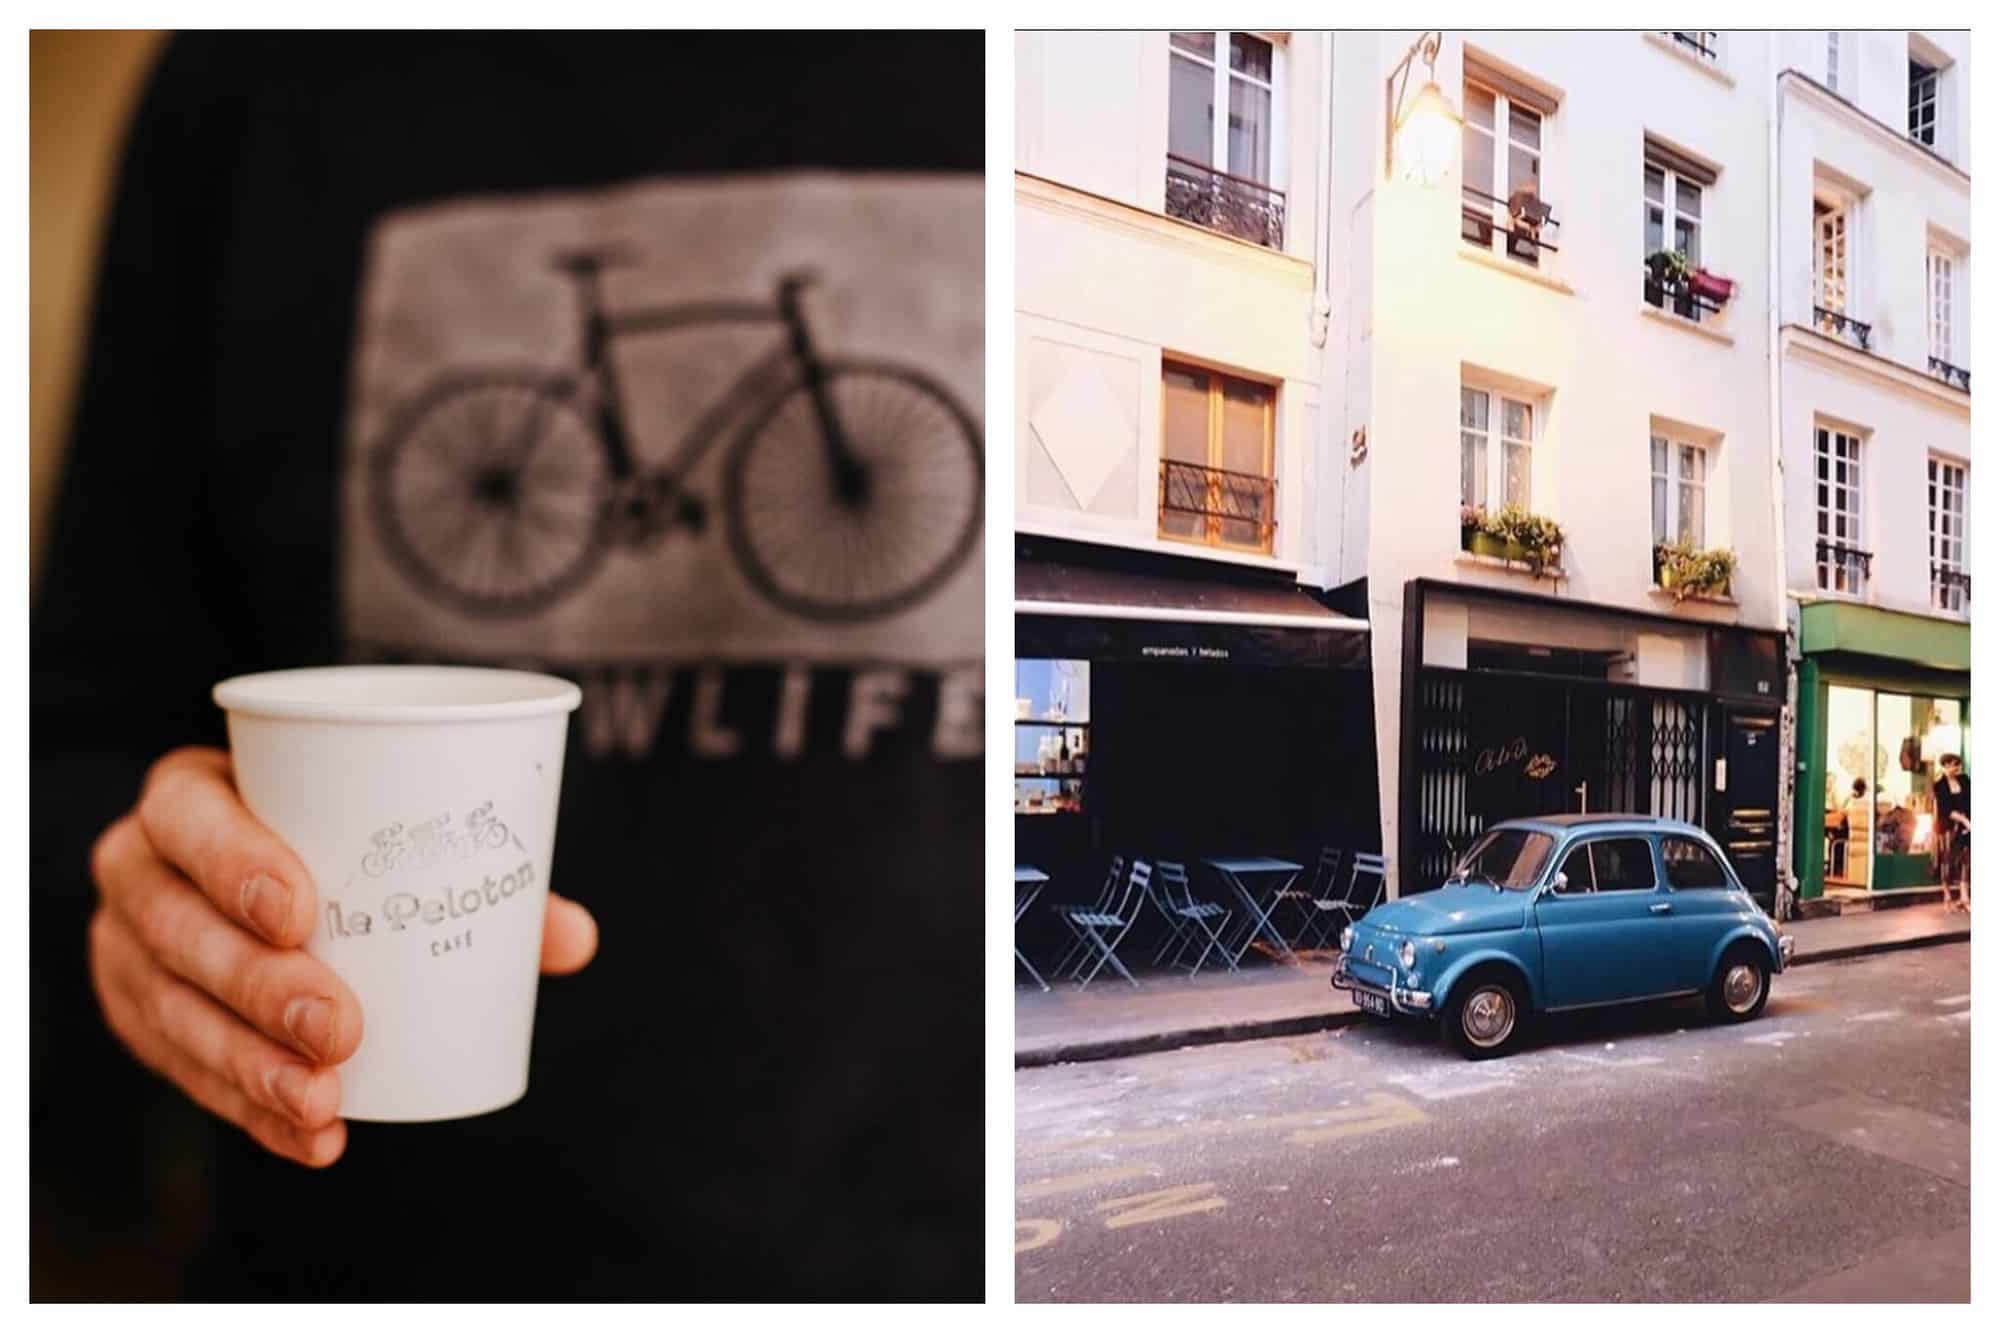 Left: an upclose photo of a man holding a Le Peloton Café coffee cup, who is also wearing a black shirt with a bicycle on it in the background. Right: a photo of a blue vintage mini car outside the Ob-La-Di cafe in Paris, on an empty street. 